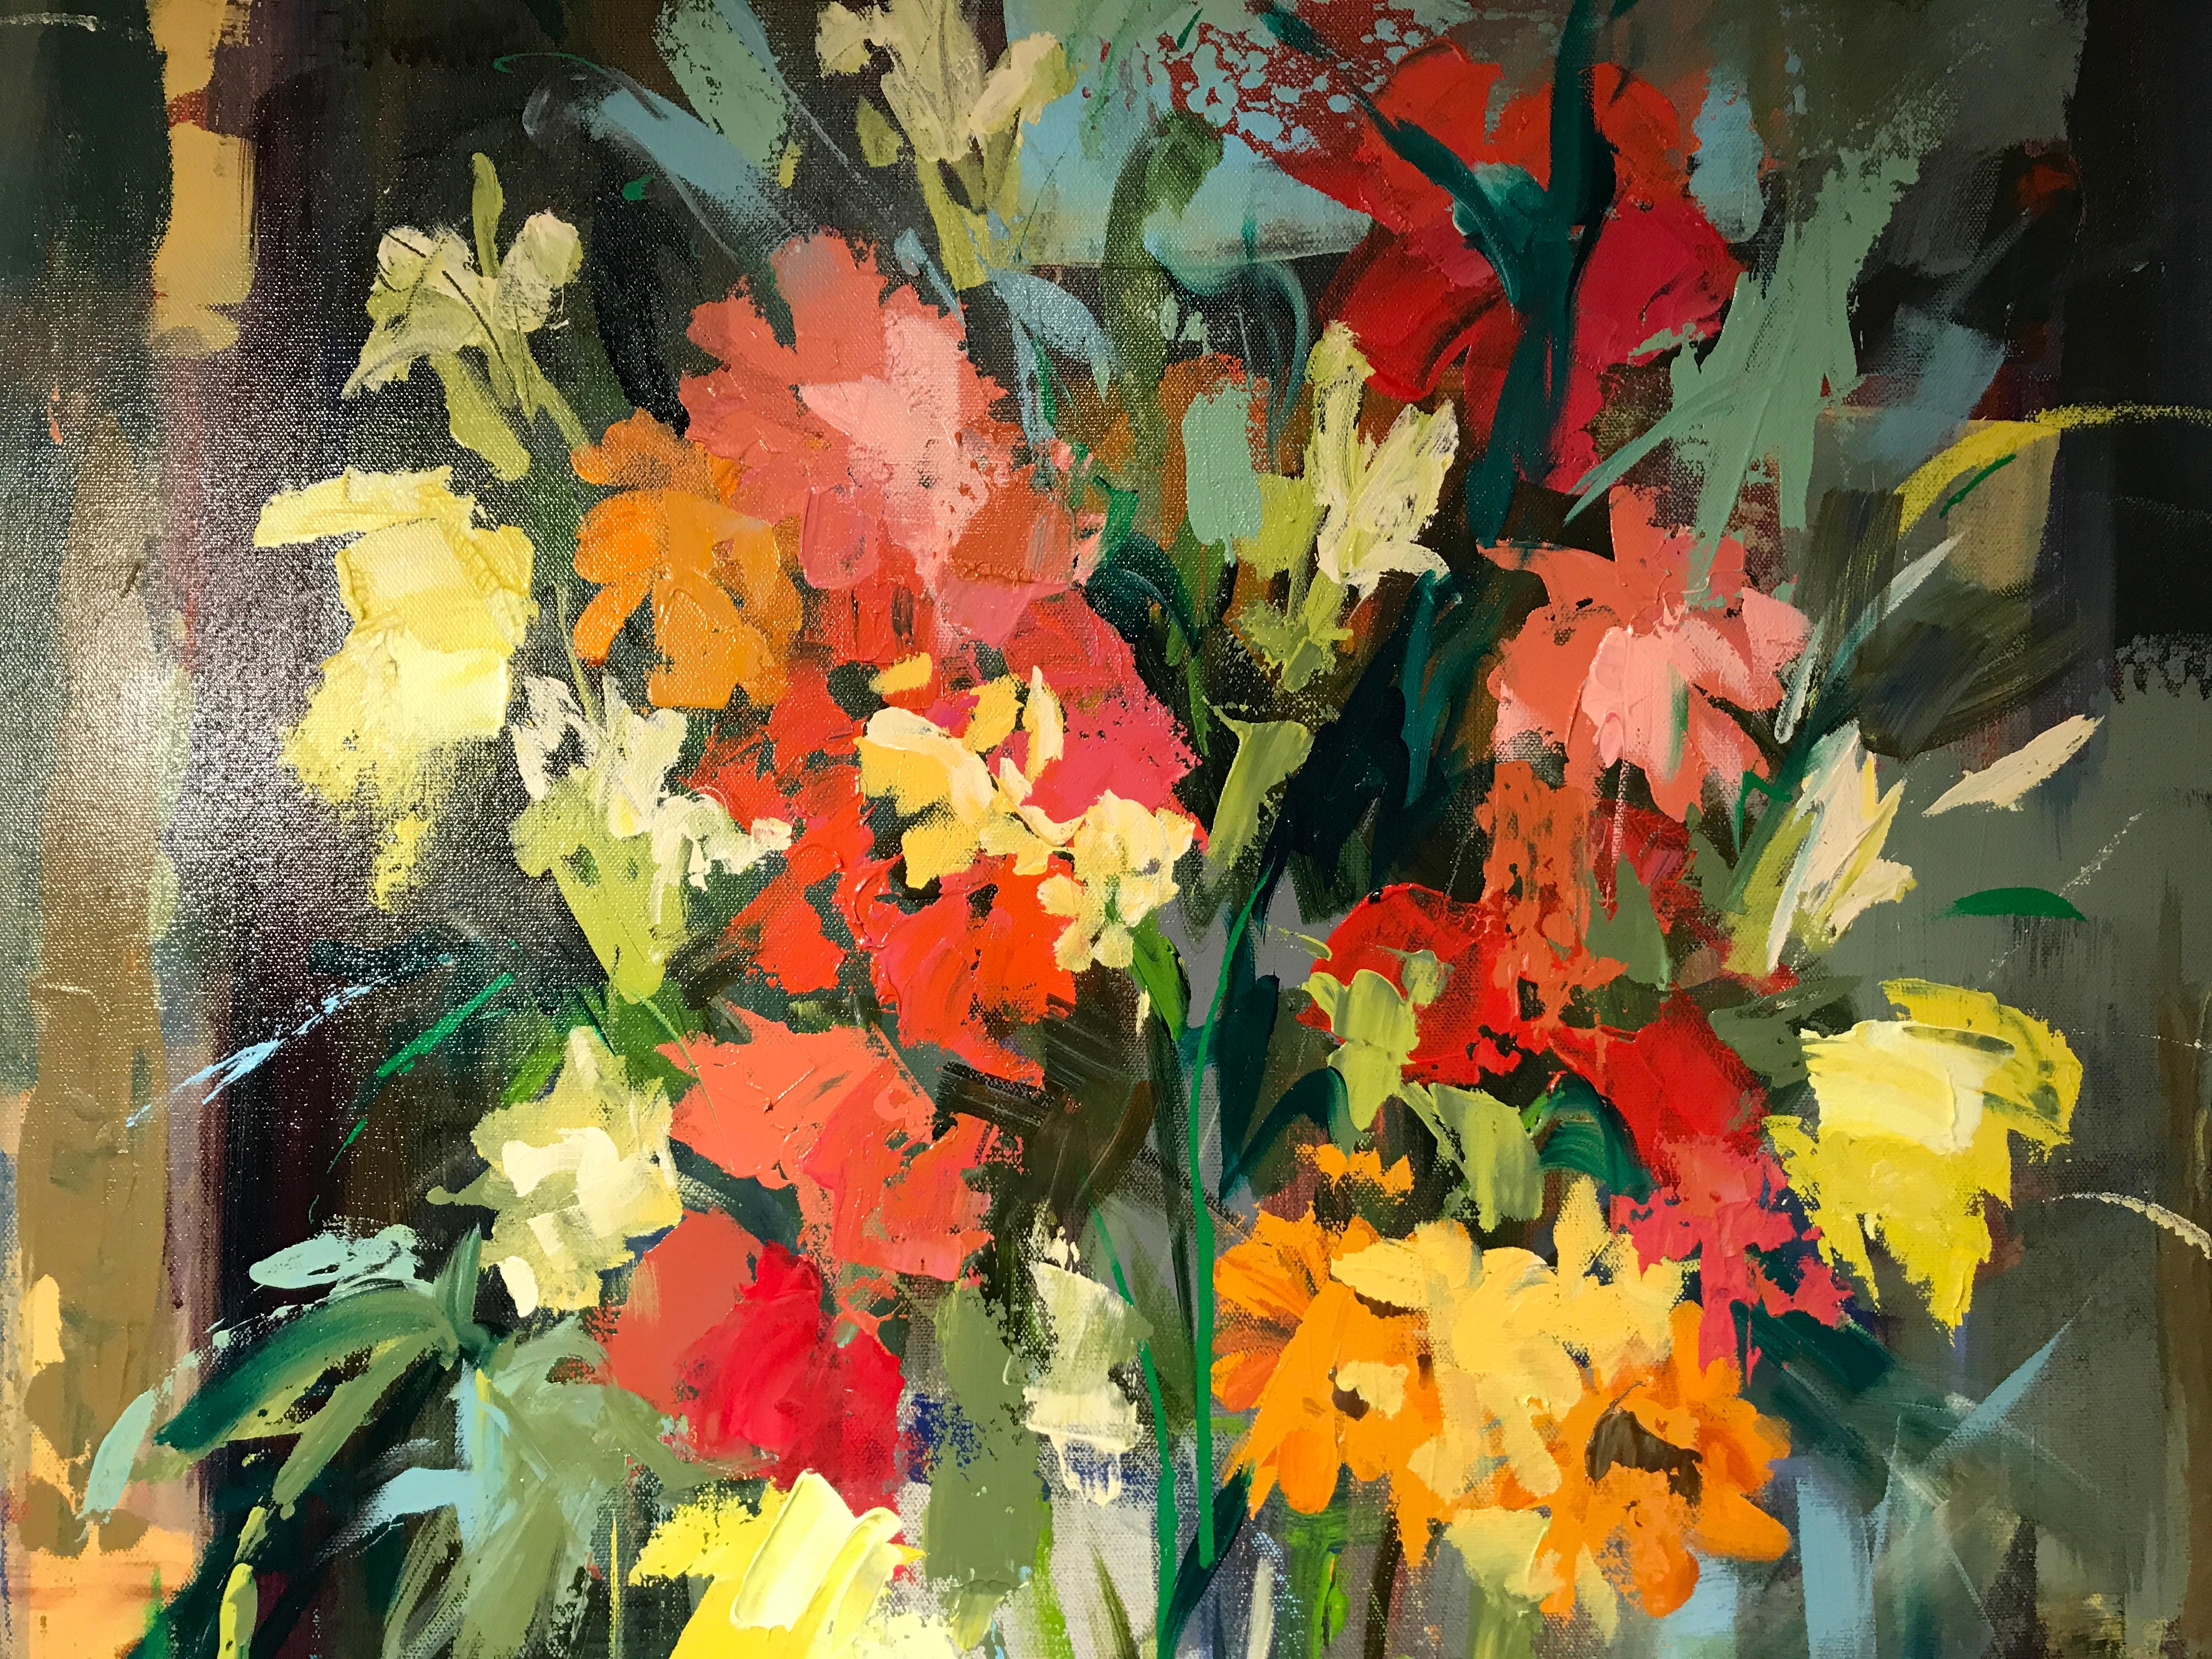 Ferry Building Flower Market, Amy Dixon 2018 Abstract Floral Still-Life Painting 4